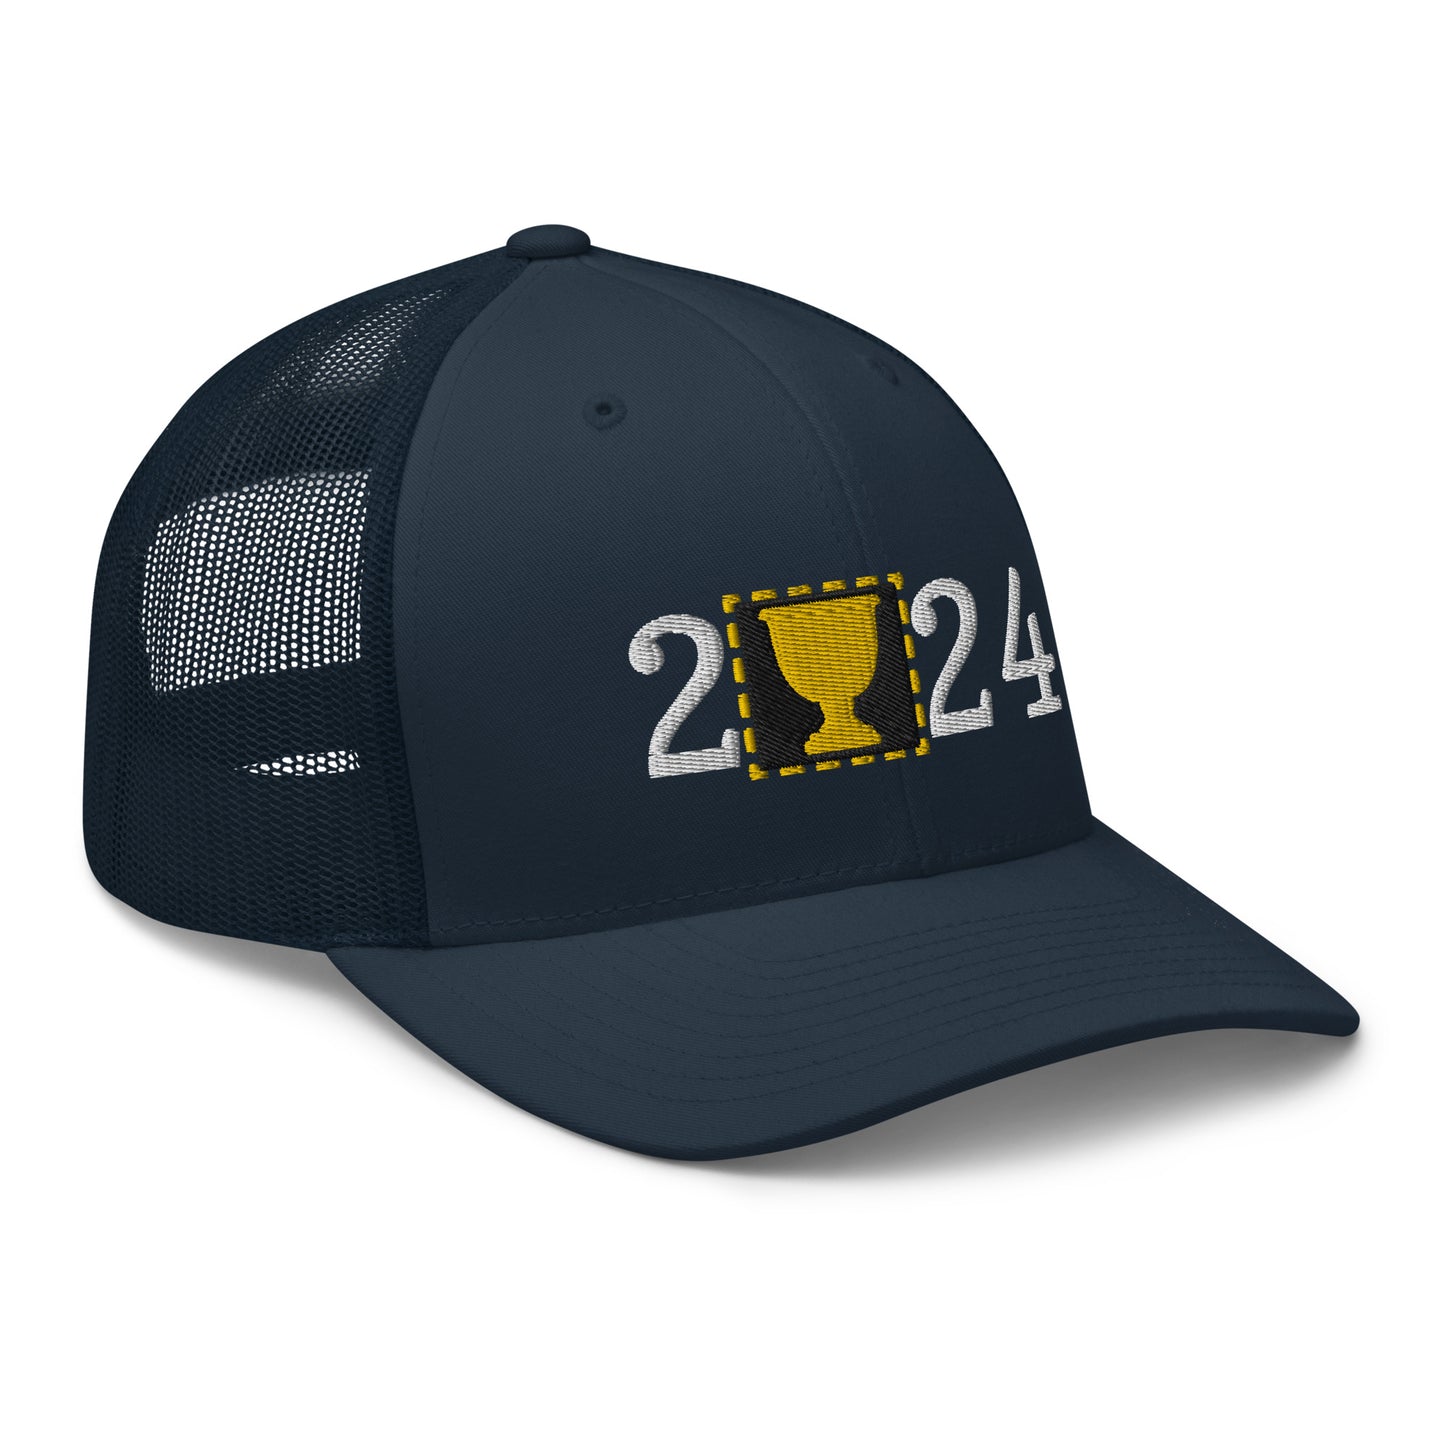 President's Cup Hat / Frank hat / Presidents Cup 2024 / Trucker Cap